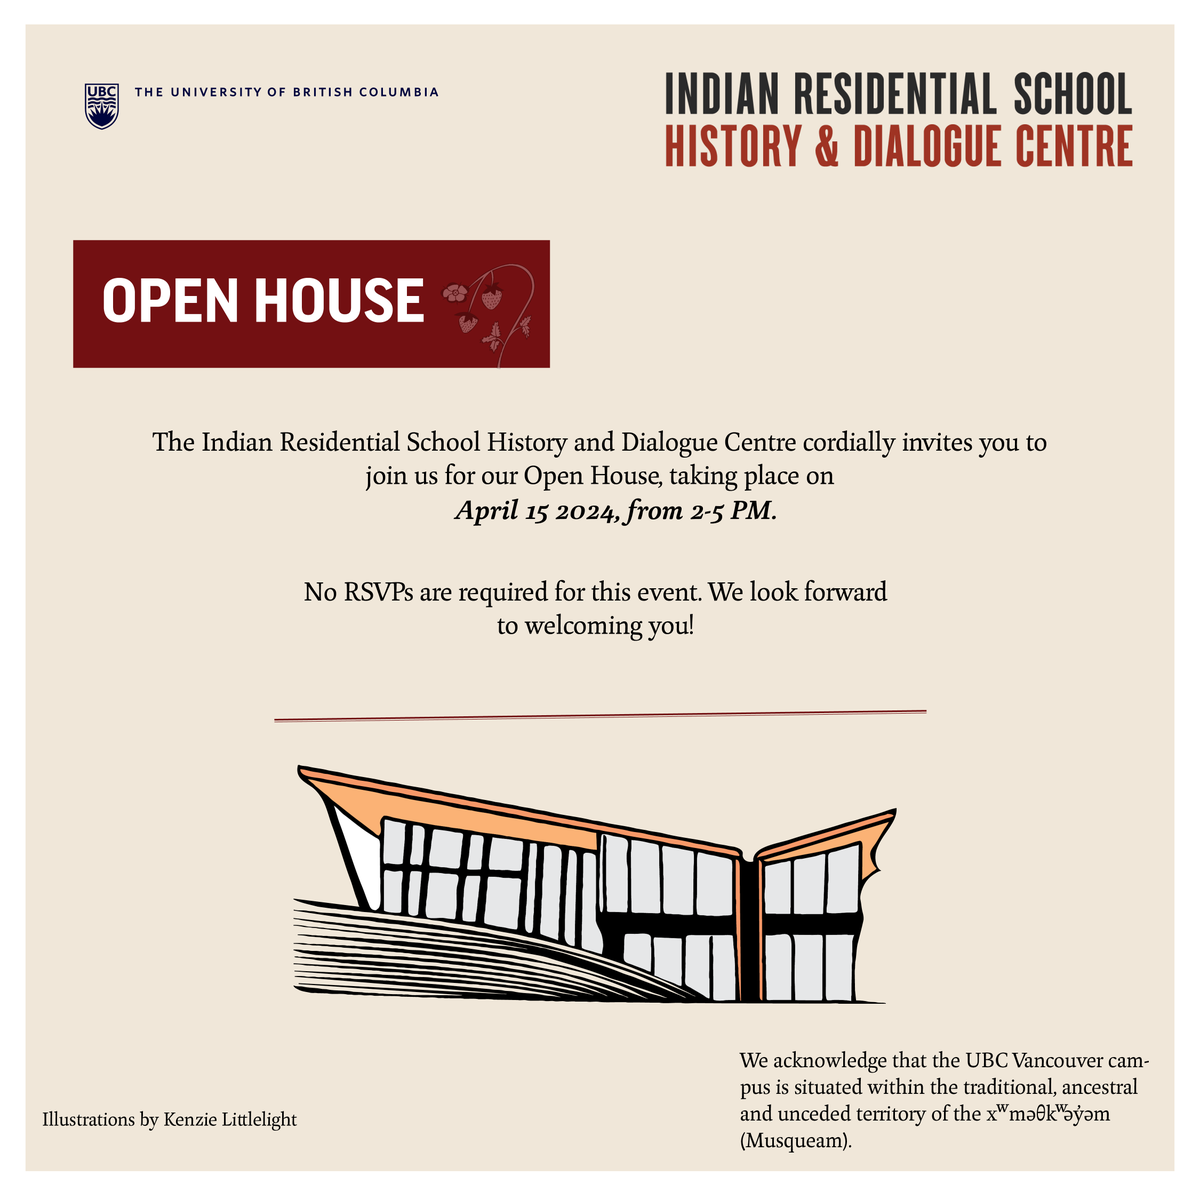 You are invited! Join us at our Open House, April 15 2-5PM.